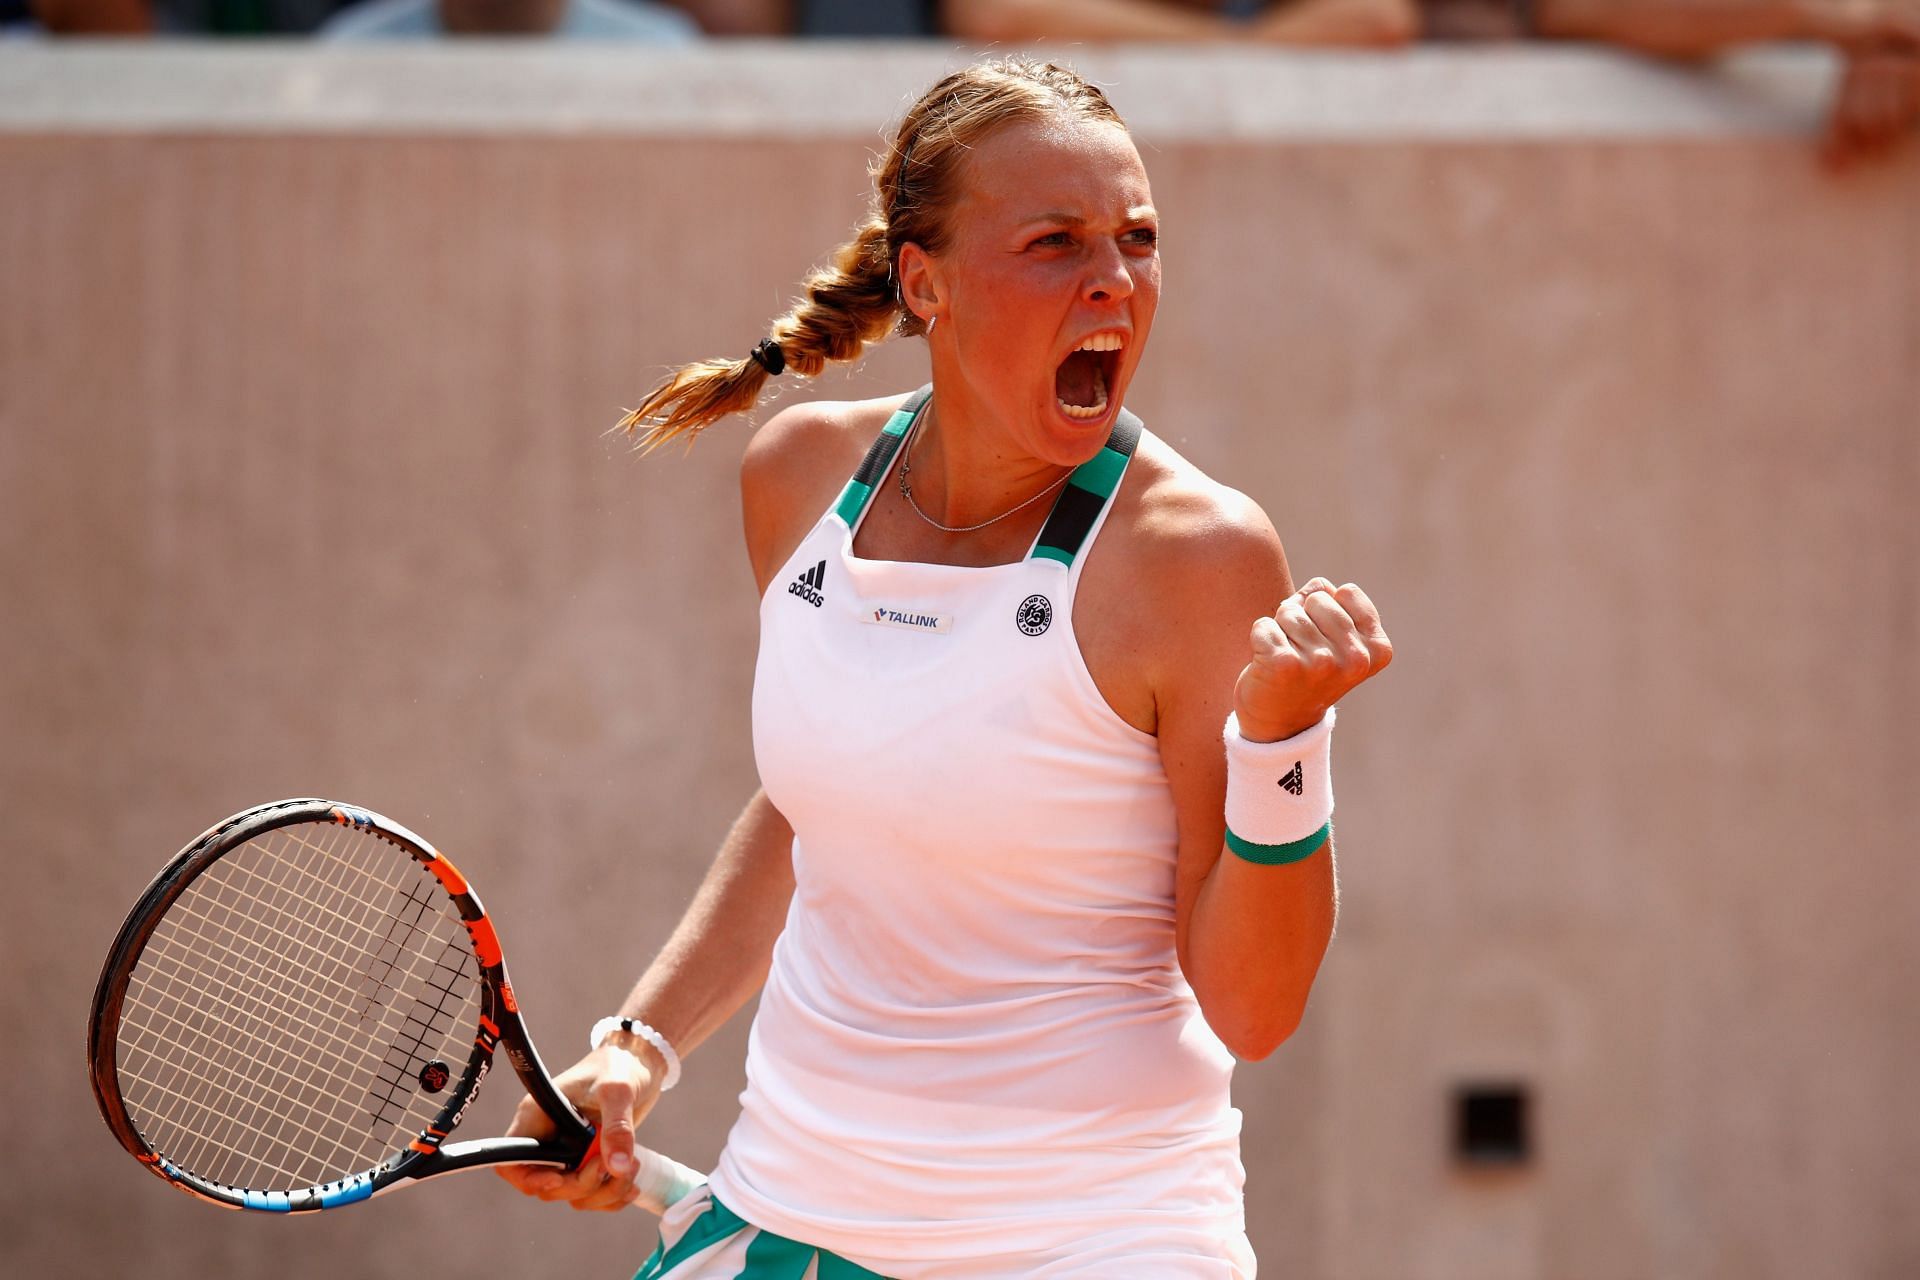 Anett Kontaveit is the second seed at the 2022 Canadian Open